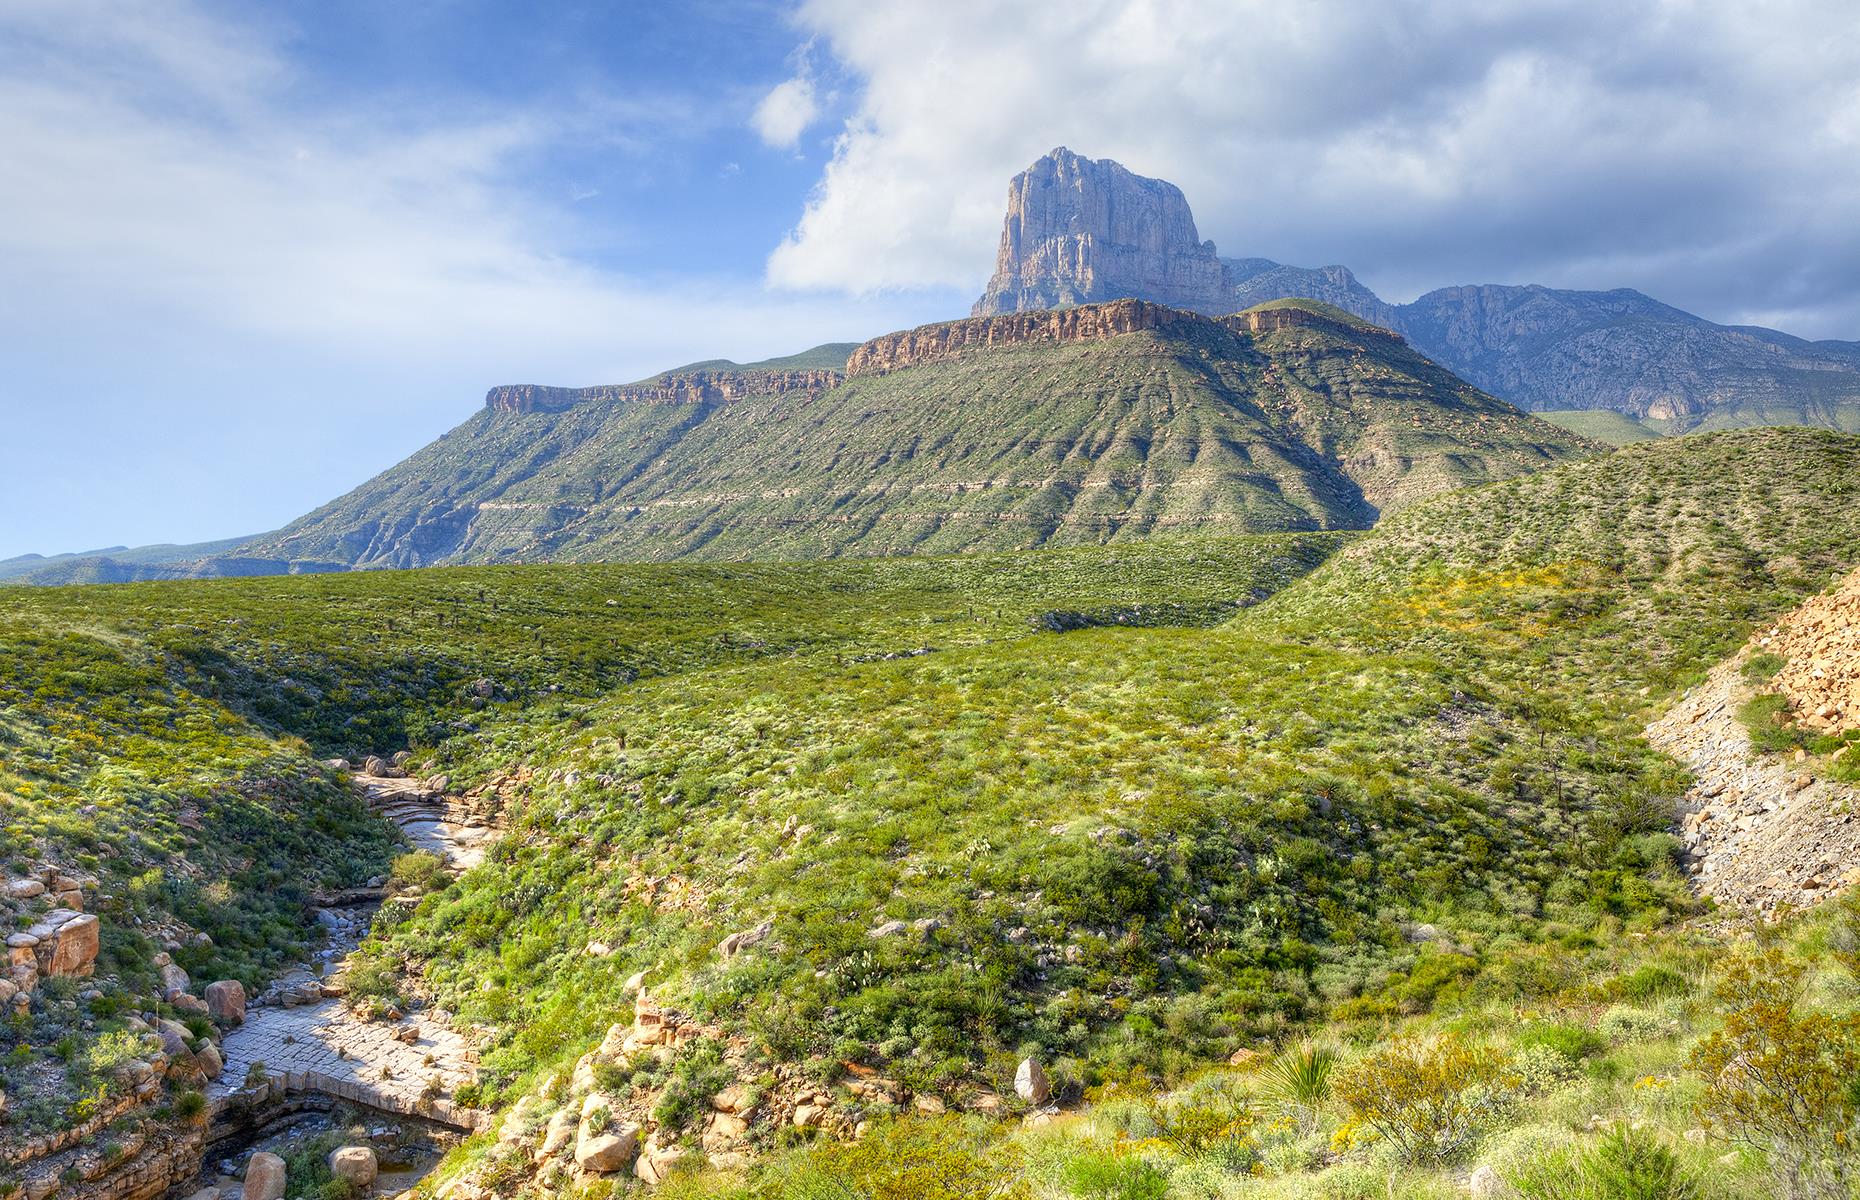 <p>Around 100 miles (160.9km) east of El Paso, right in the northwestern corner of the state, lies <a href="https://www.nps.gov/gumo/index.htm">Guadalupe Mountains National Park</a>. Home to the four highest peaks in Texas, it's popular with hikers thanks to more than 80 miles (129km) of trails that stretch through woodland canyons. There's plenty of wildlife to spot as well, including golden eagles, and the visitor center in Pine Springs offers more information on the park, as well as all the details on hiking and biking trails. </p>